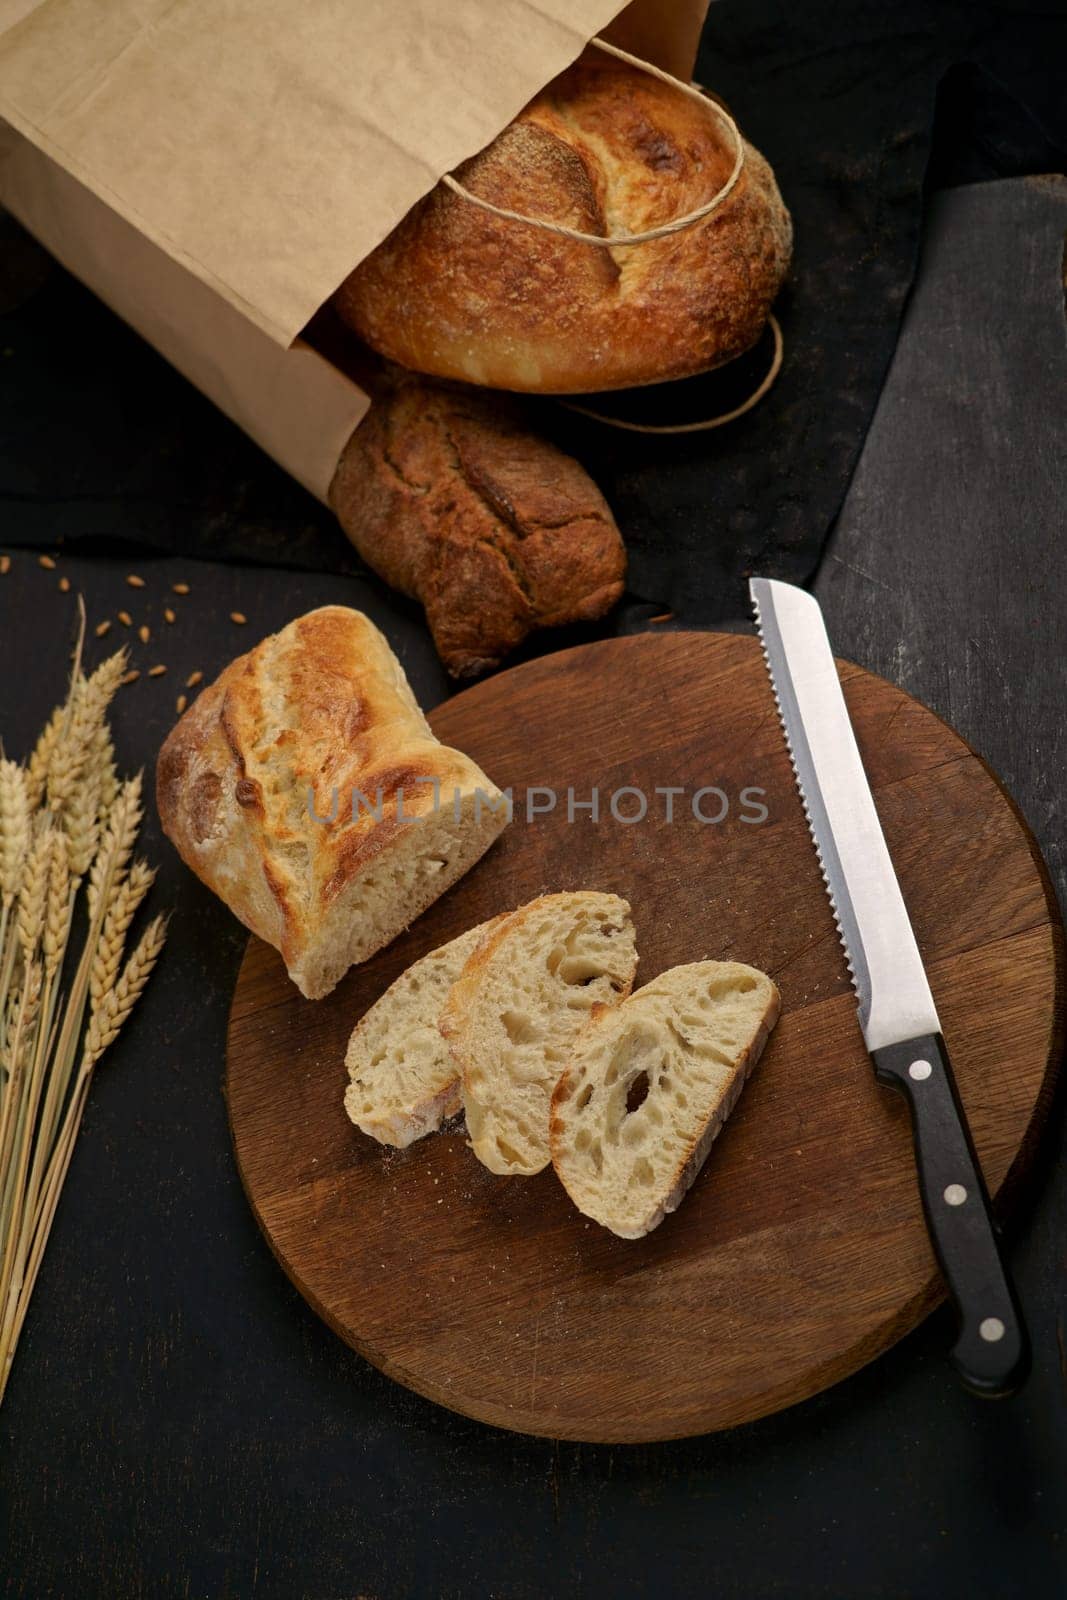 Whole grain bread put on kitchen wood plate with a knife for cut. Freshly baked rye bread on a wooden board. Fresh bread on table close-up. Fresh bread on the kitchen table by aprilphoto